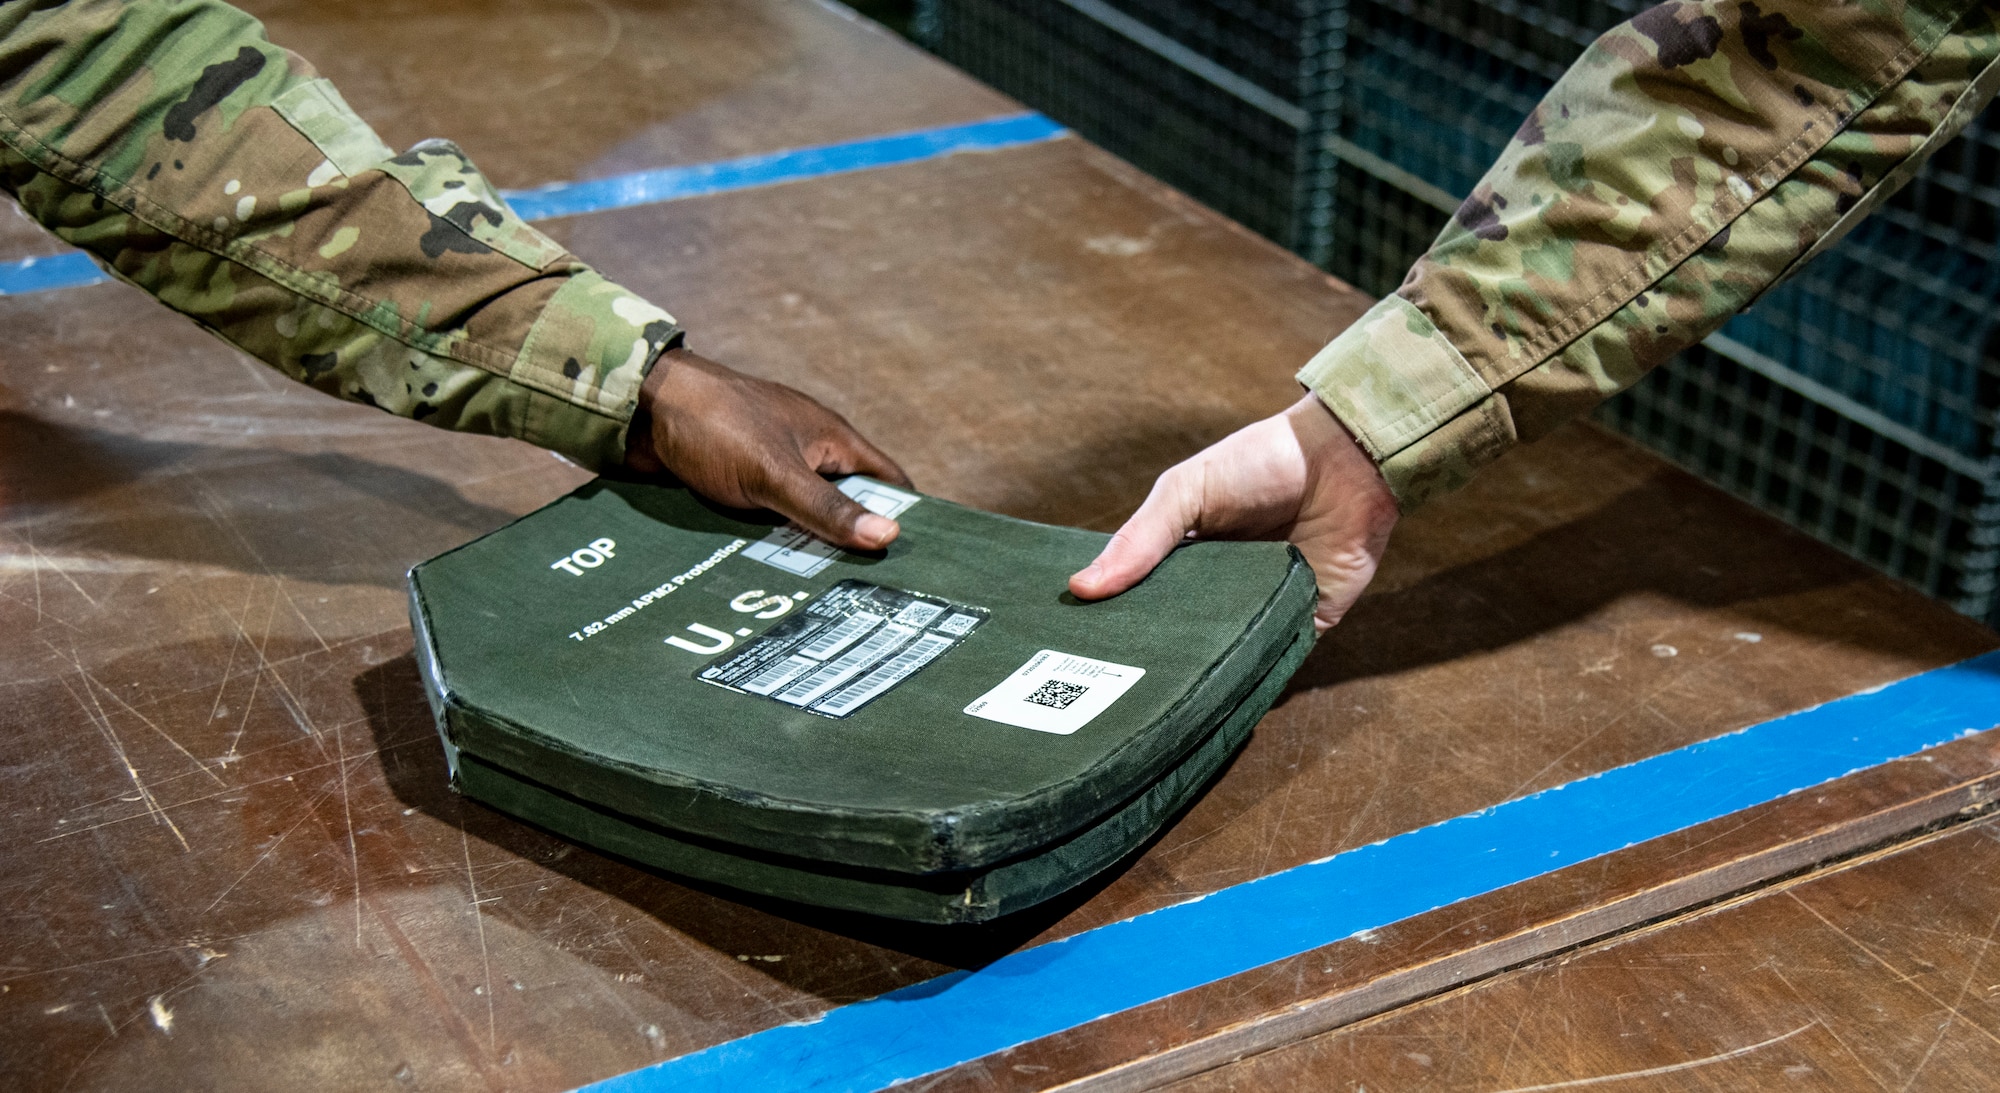 Senior Airman Joseph Essilfie (left) and Airman 1st Class Jake Gaffney, 332d Expeditionary Logistics Readiness Squadron Individual Protective Equipment personnel, handle ballistic plates at an undisclosed location, Southwest Asia, Nov. 11, 2022. These plates must be regularly shipped to testing facilities to ensure their structural integrity and continued effectiveness in body armor. (U.S. Air Force photo by: Tech. Sgt. Jim Bentley)